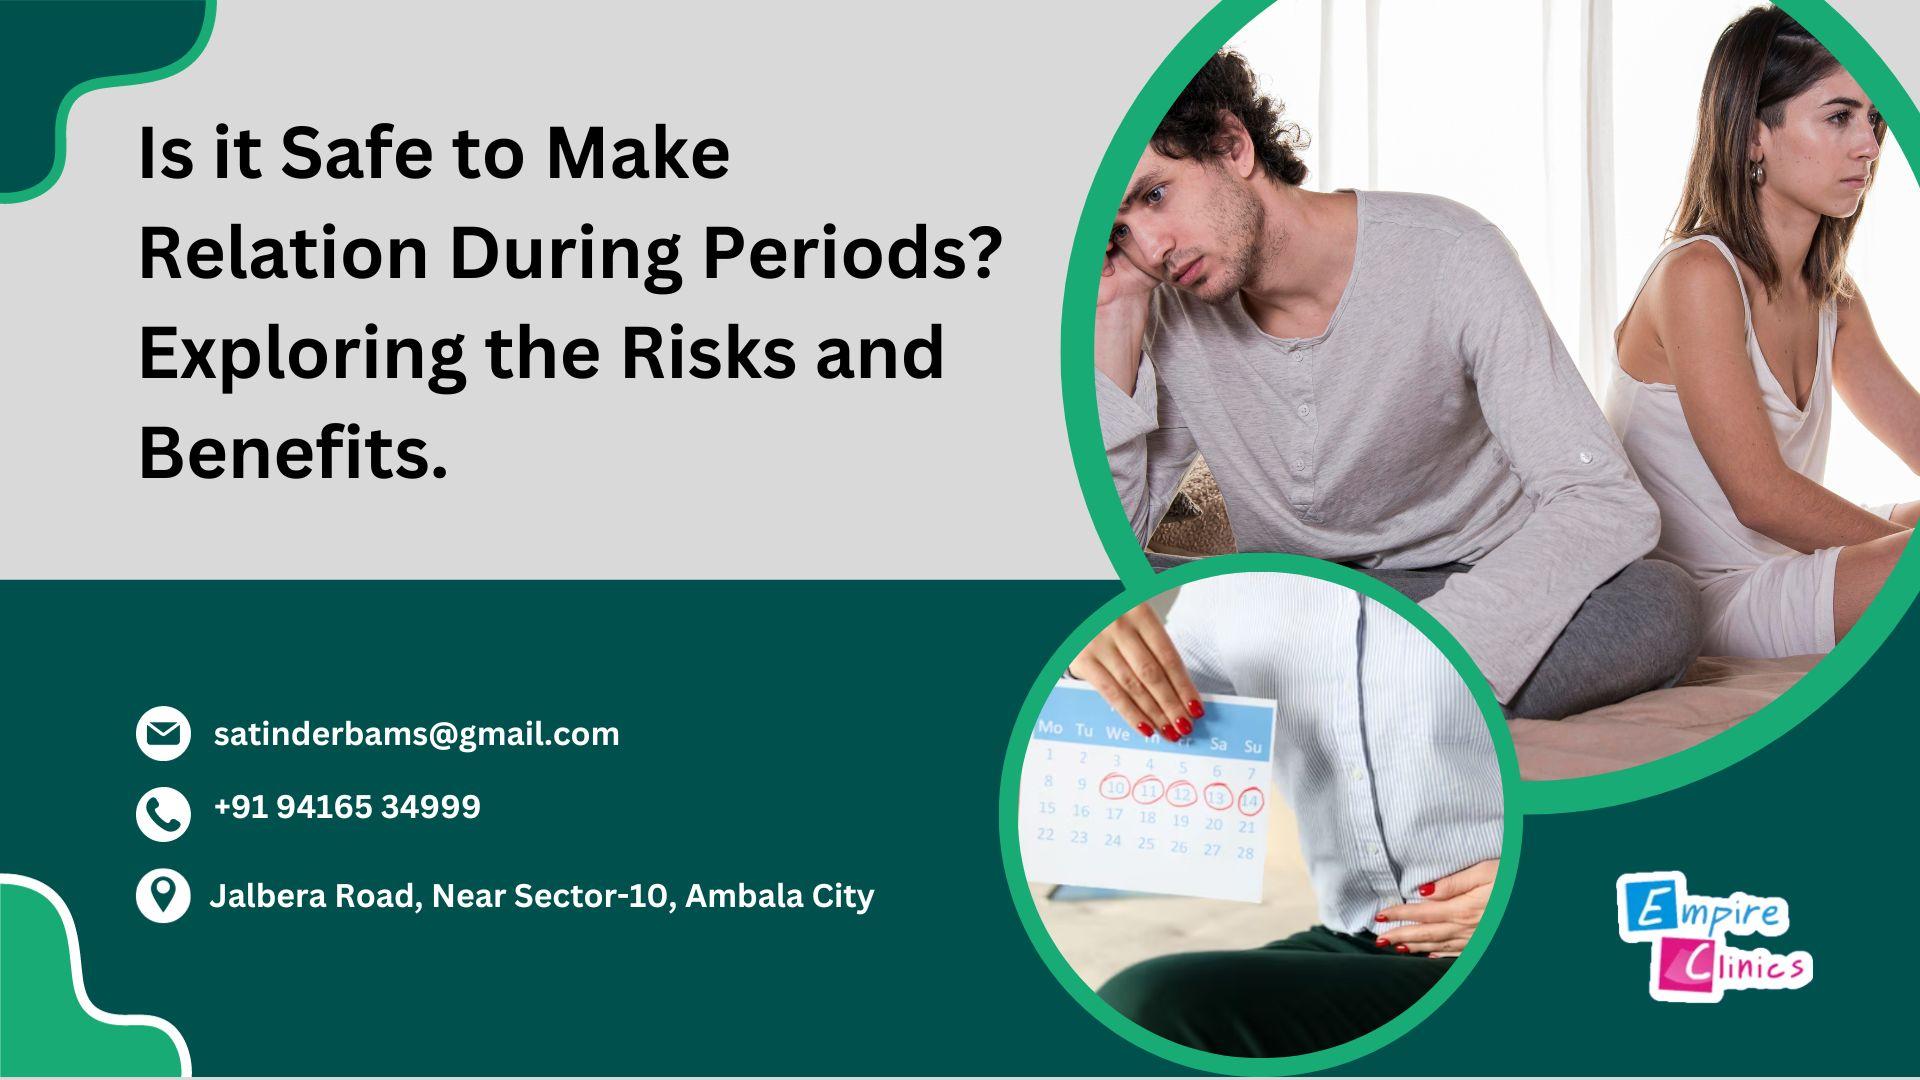 is-it-safe-to-make-relation-during-periods?-exploring-the-risks-and-benefits.